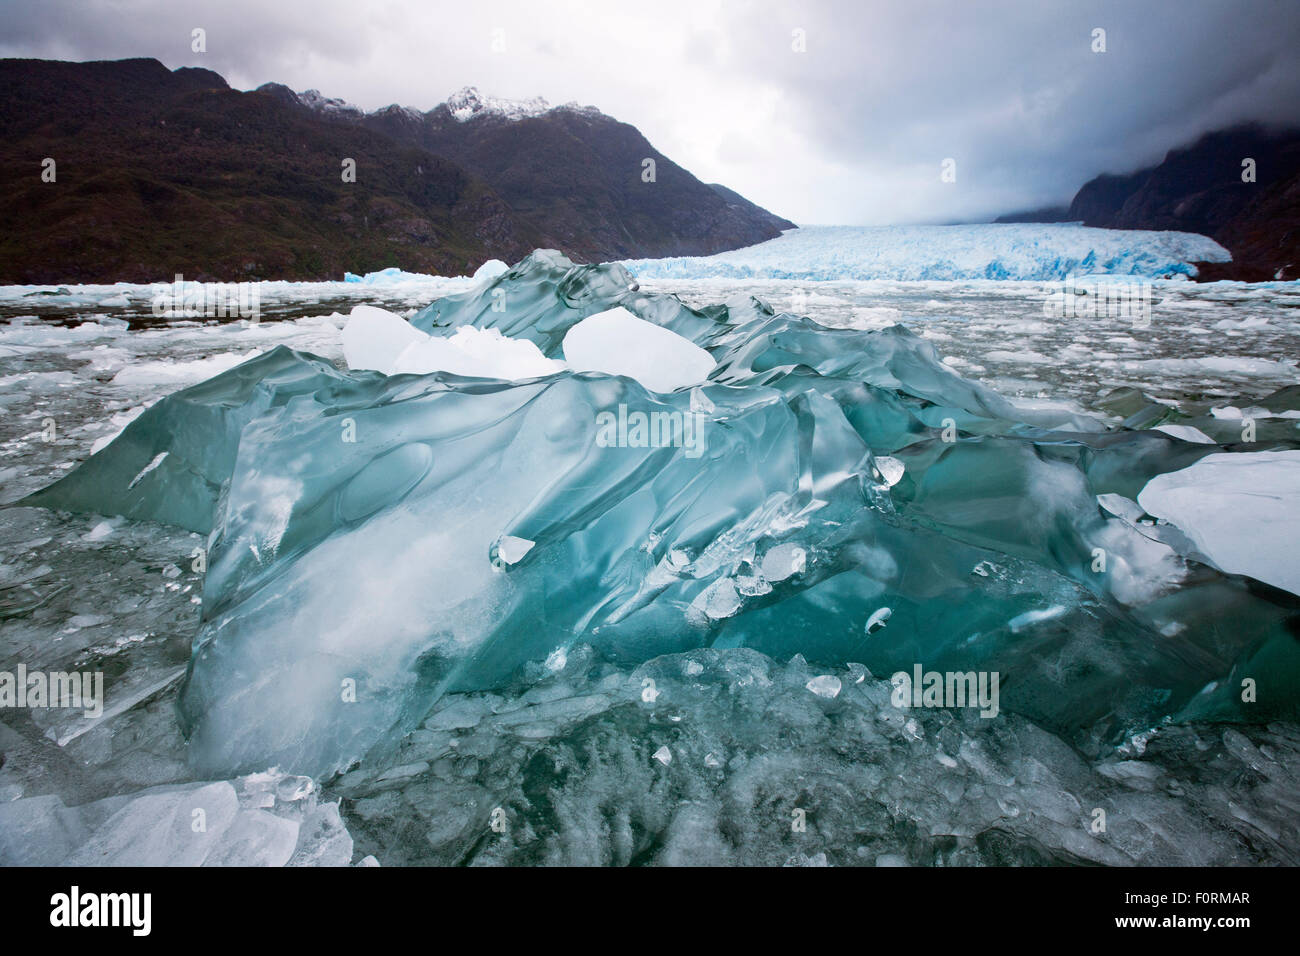 Floating ice below the San Rafael Glacier. Northern Patagonian Ice Field, Patagonia, Chile. Stock Photo